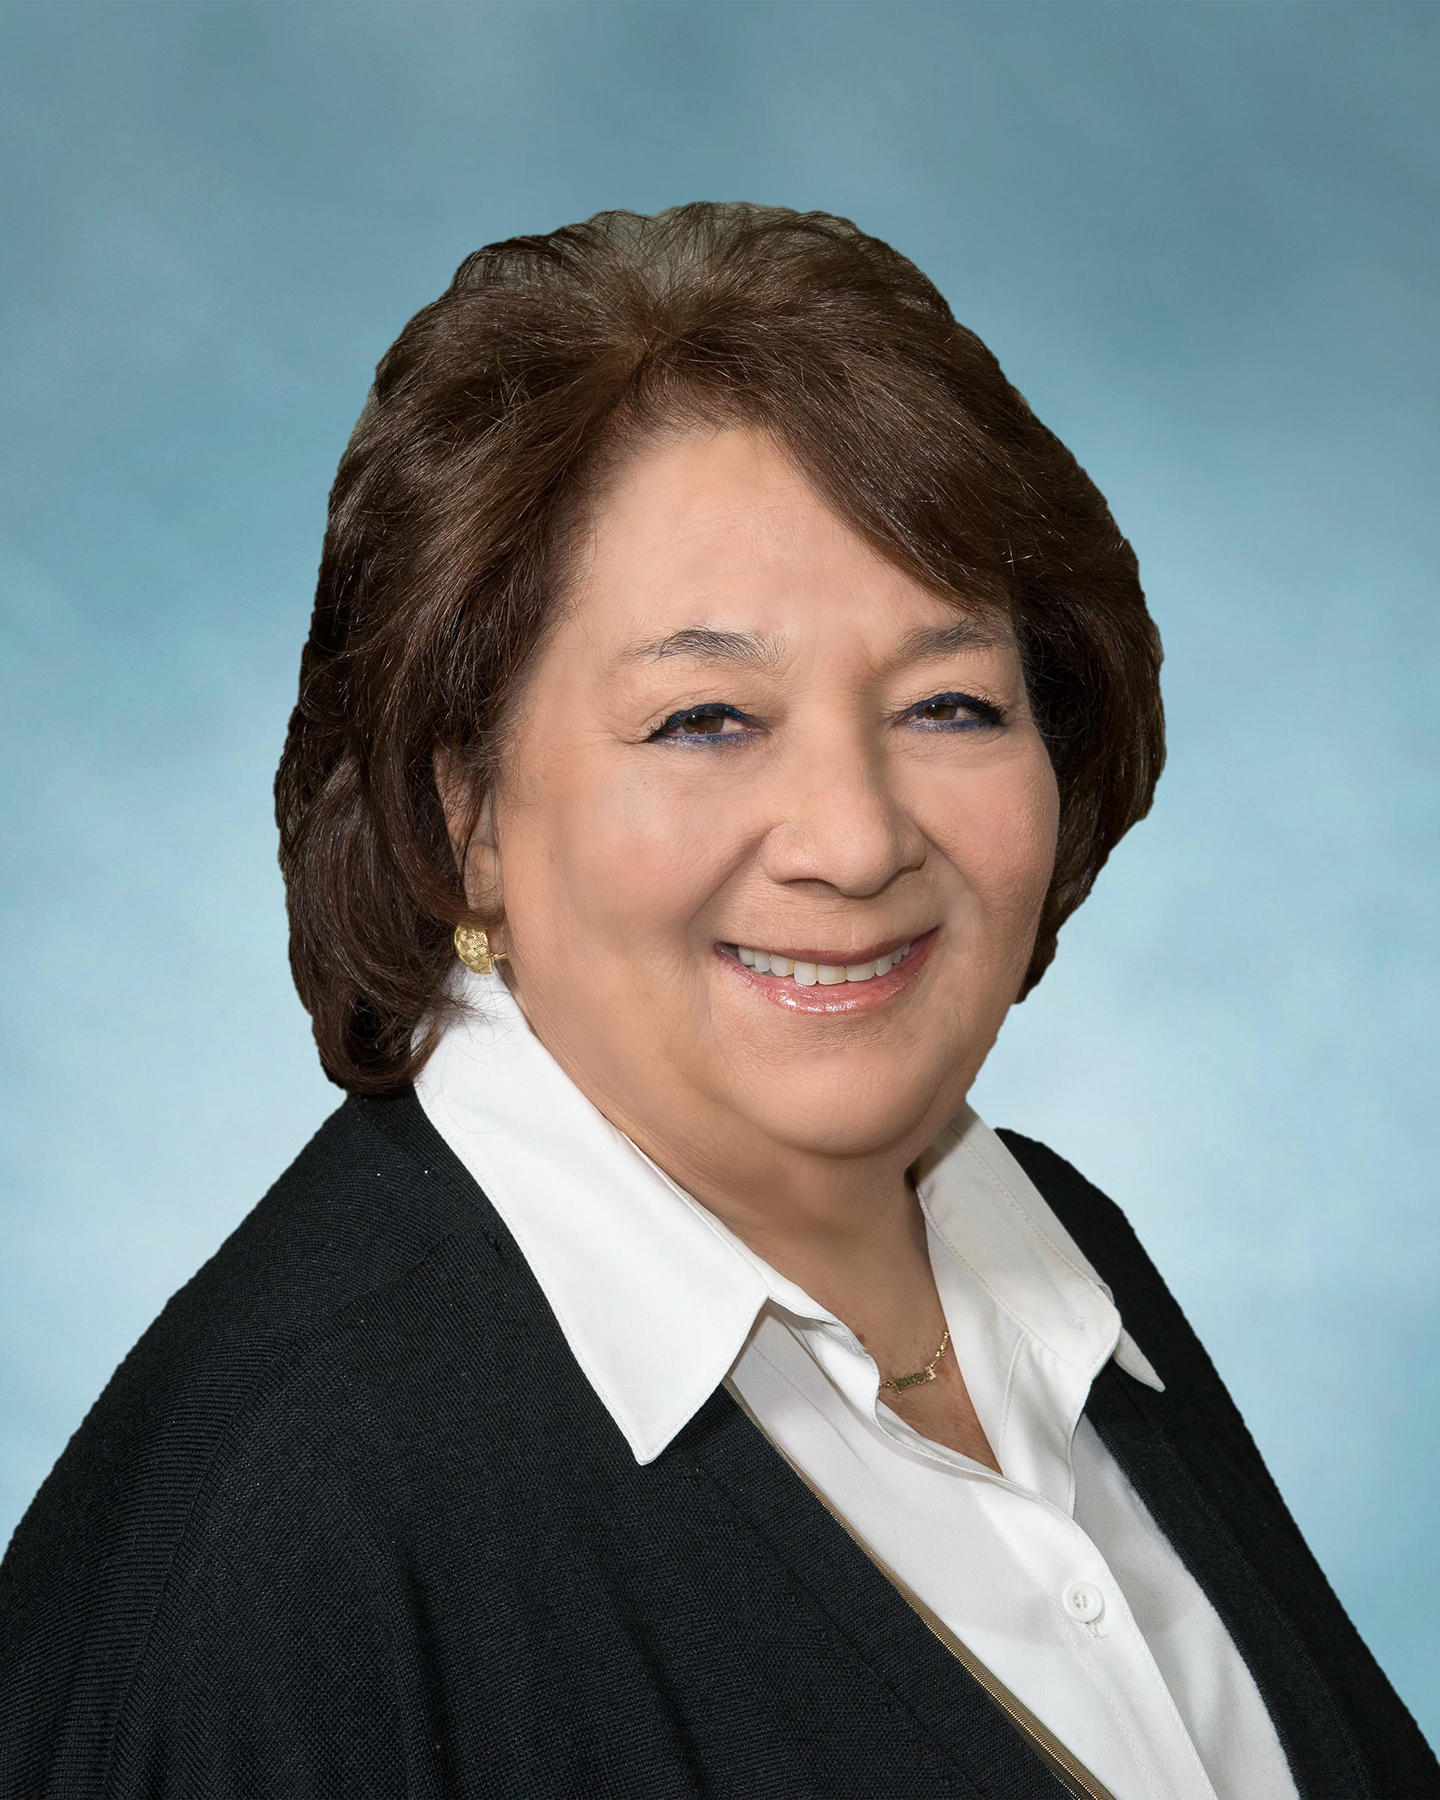 Donna Peirez was re-elected to serve as school board trustee in Great Neck. (Photo courtesy of Great Neck Public Schools)